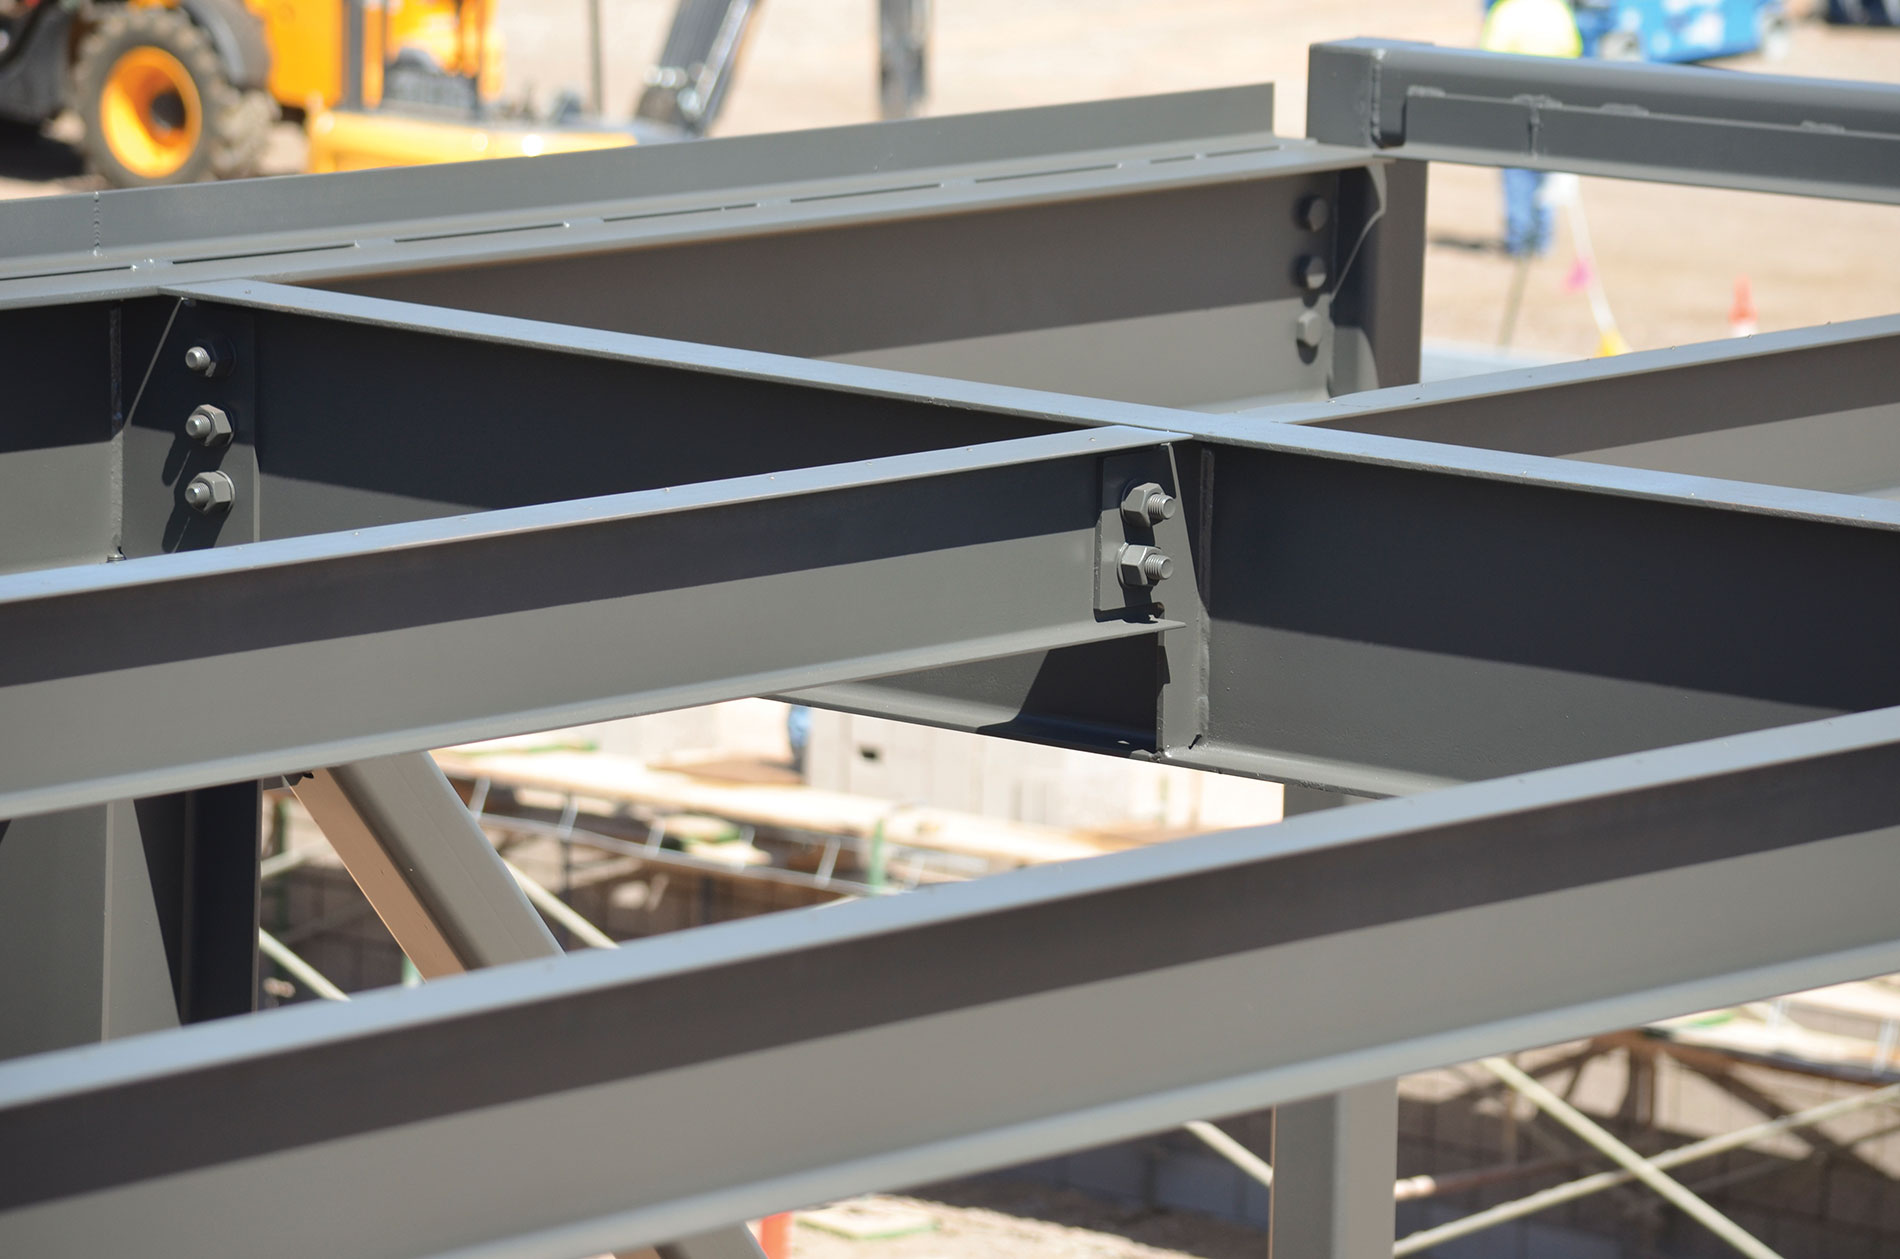 Metal bars bolted together and construction equipment in the background. Image by The Weitz Co.